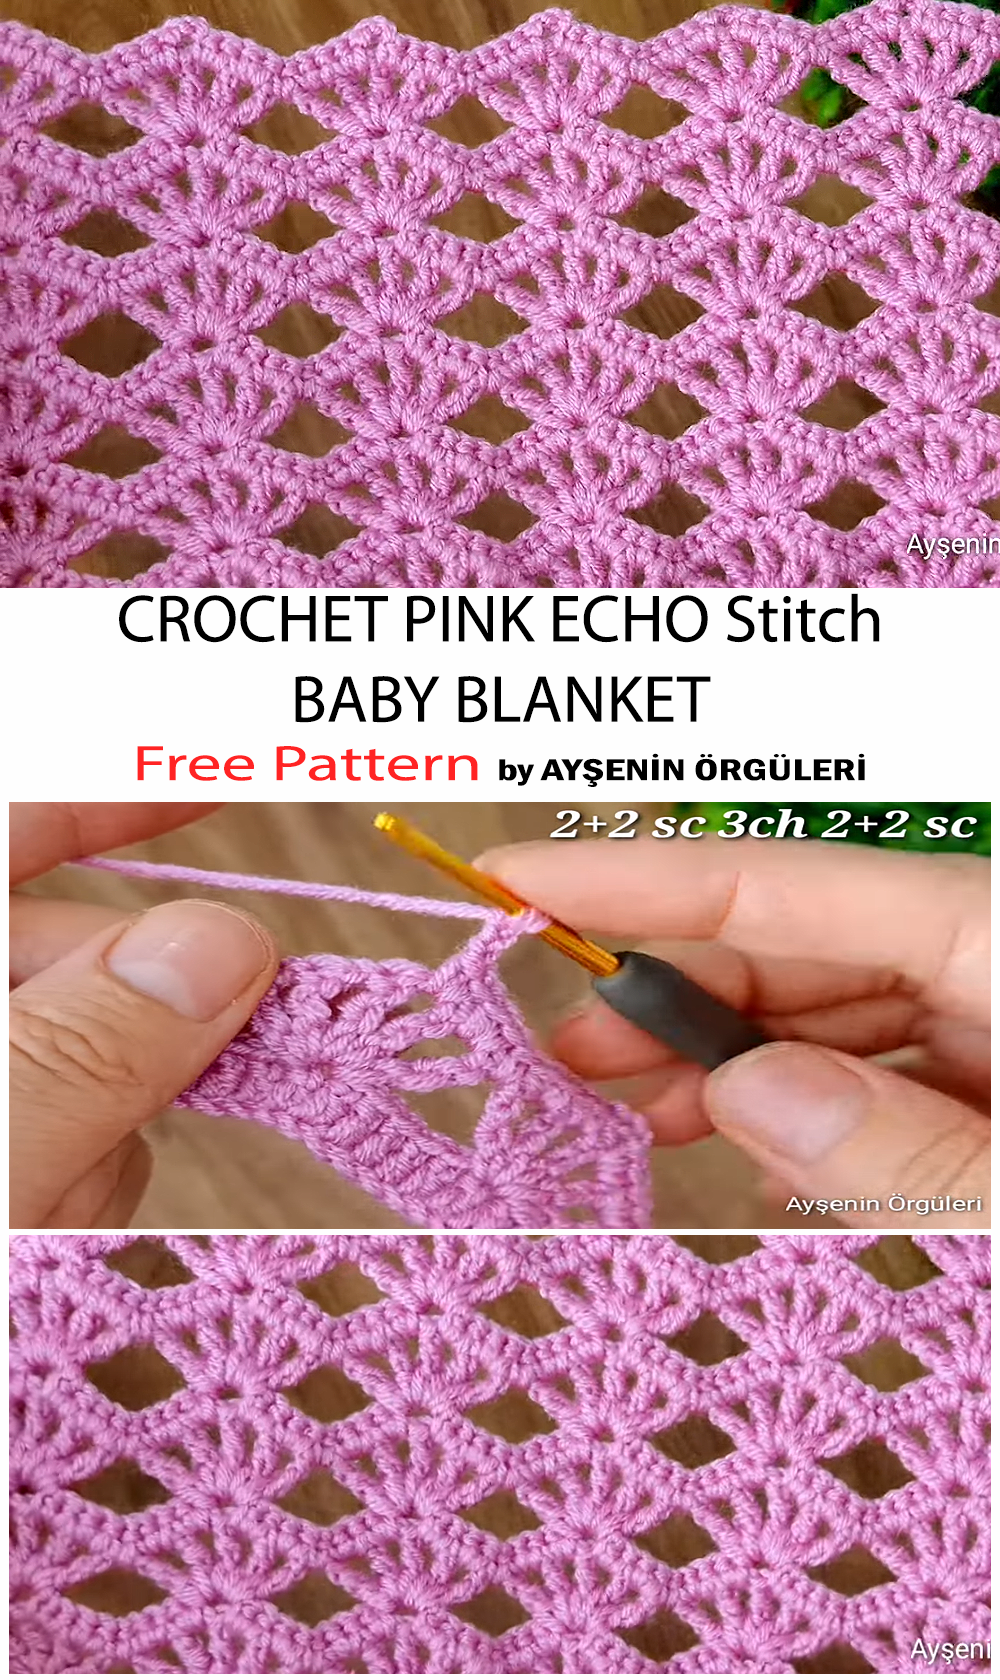 How To Crochet Pink Echo Stitch Baby Blanket - Free Pattern For Beginners